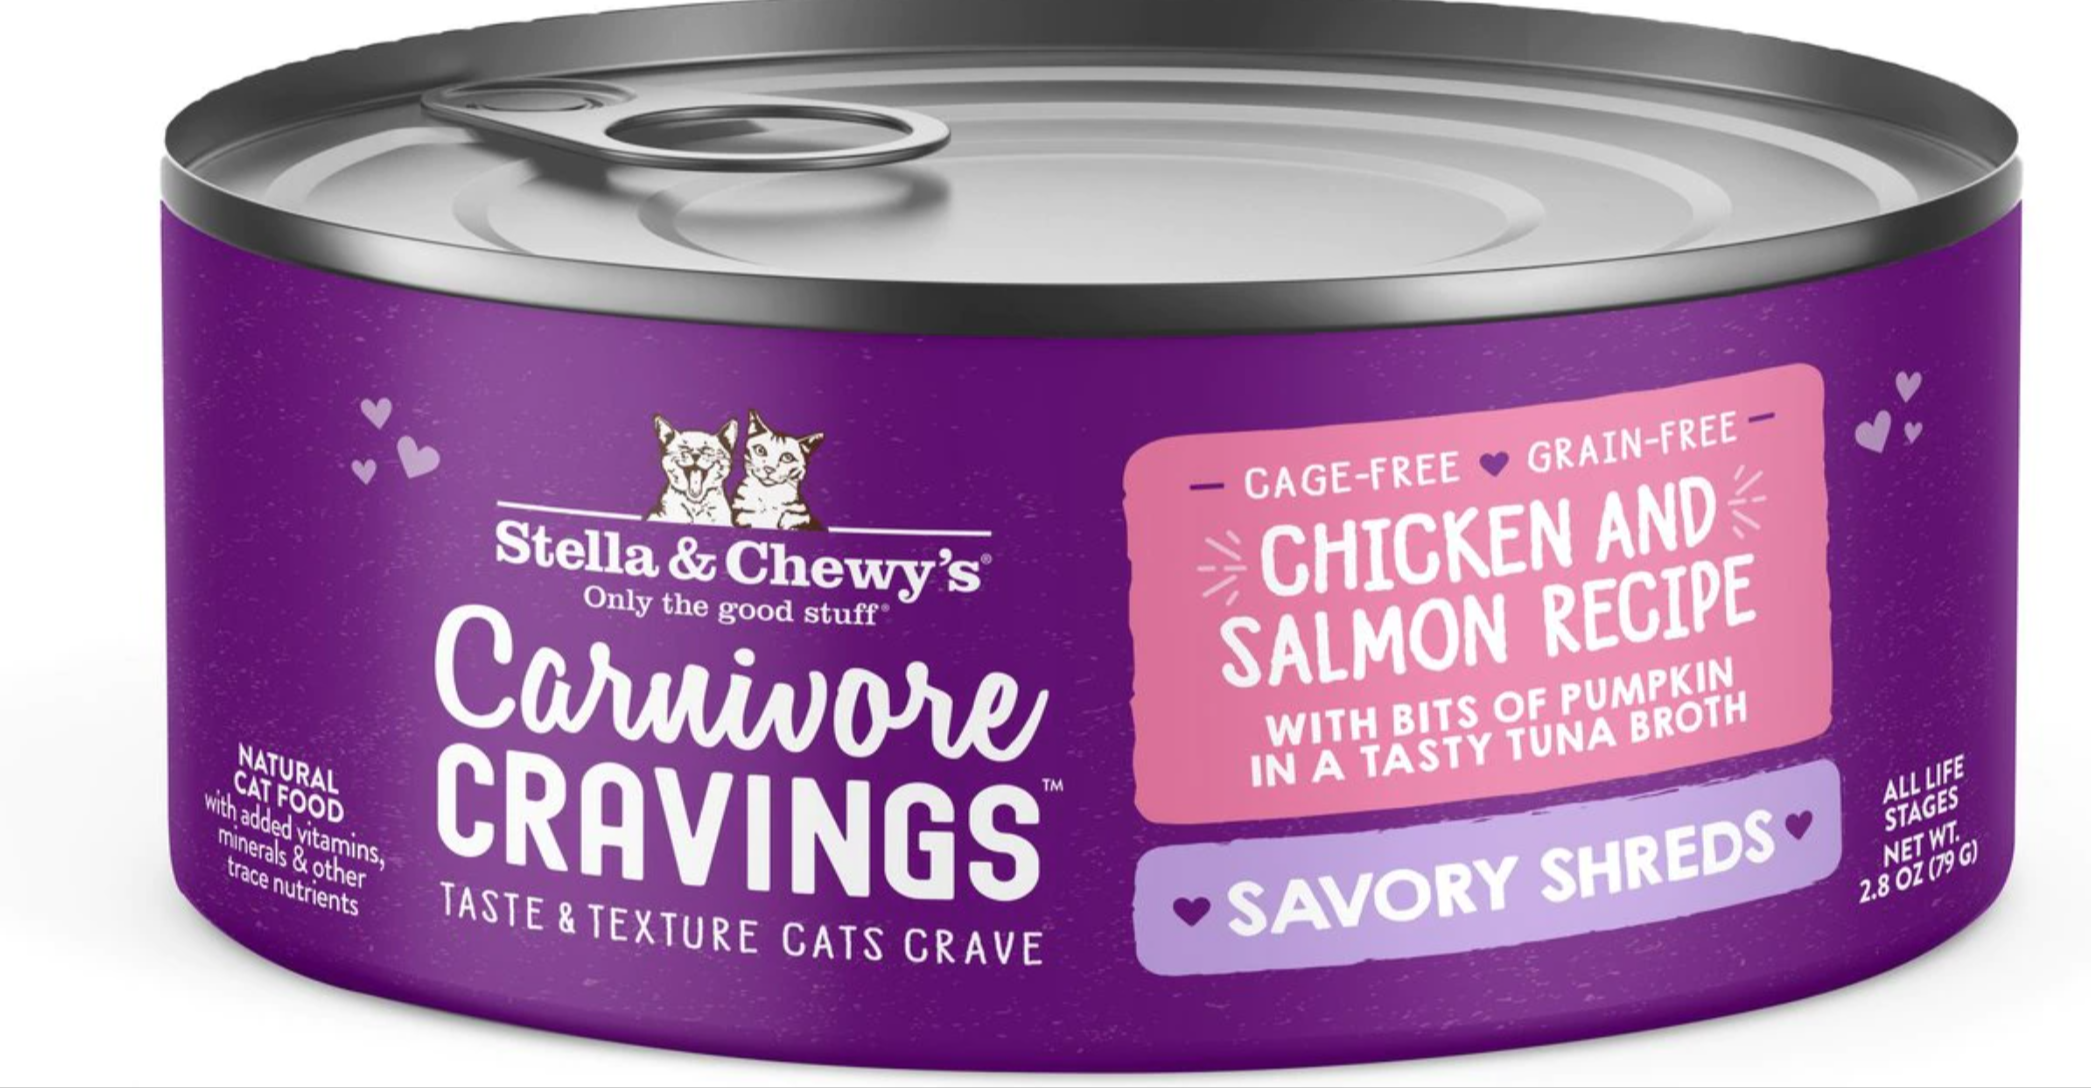 Stella & Chewy's Carnivore Cravings Savory Shreds Chicken & Salmon Recipe - 2.8oz Can